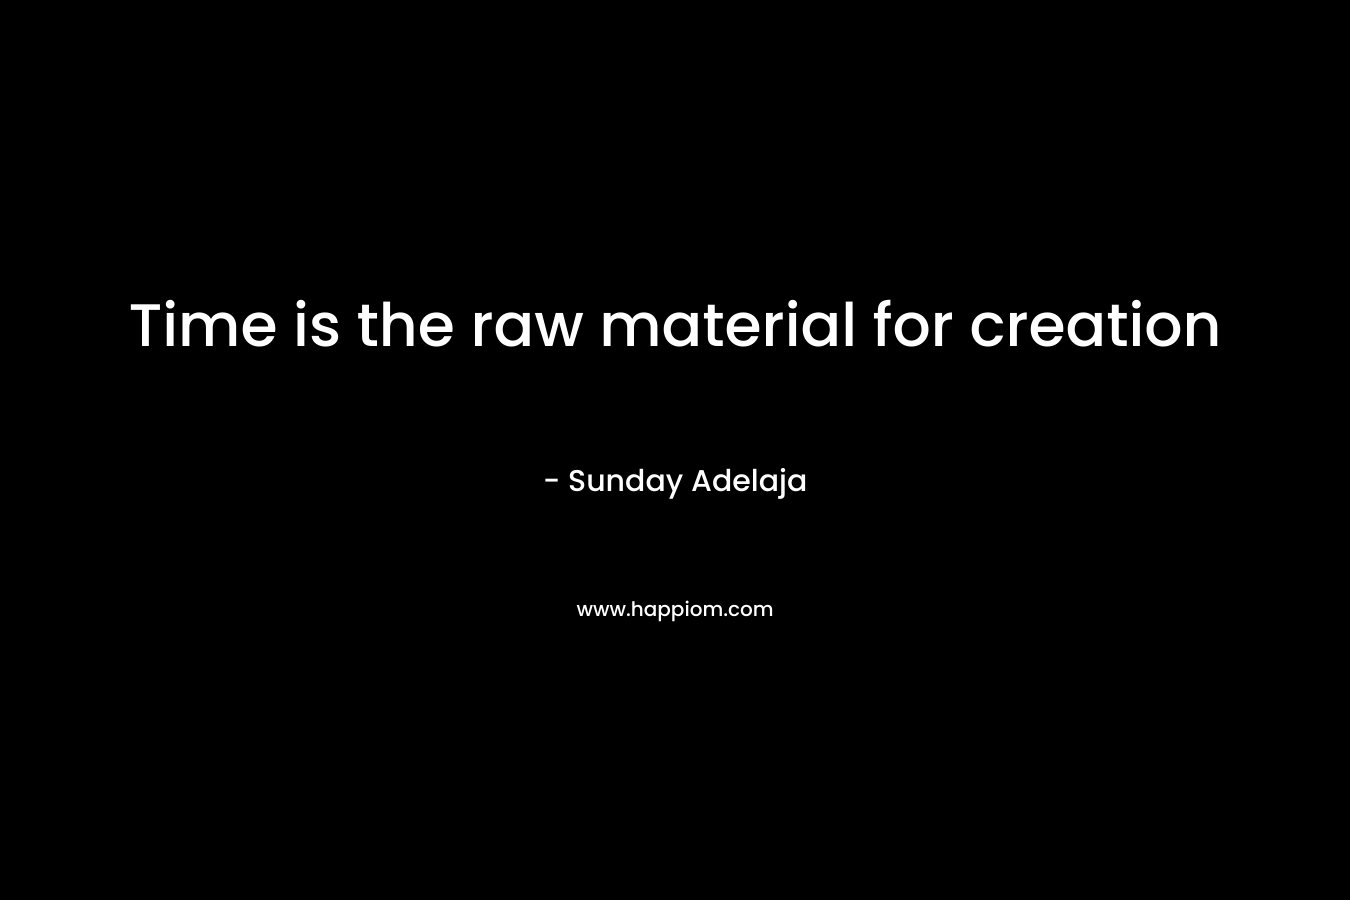 Time is the raw material for creation